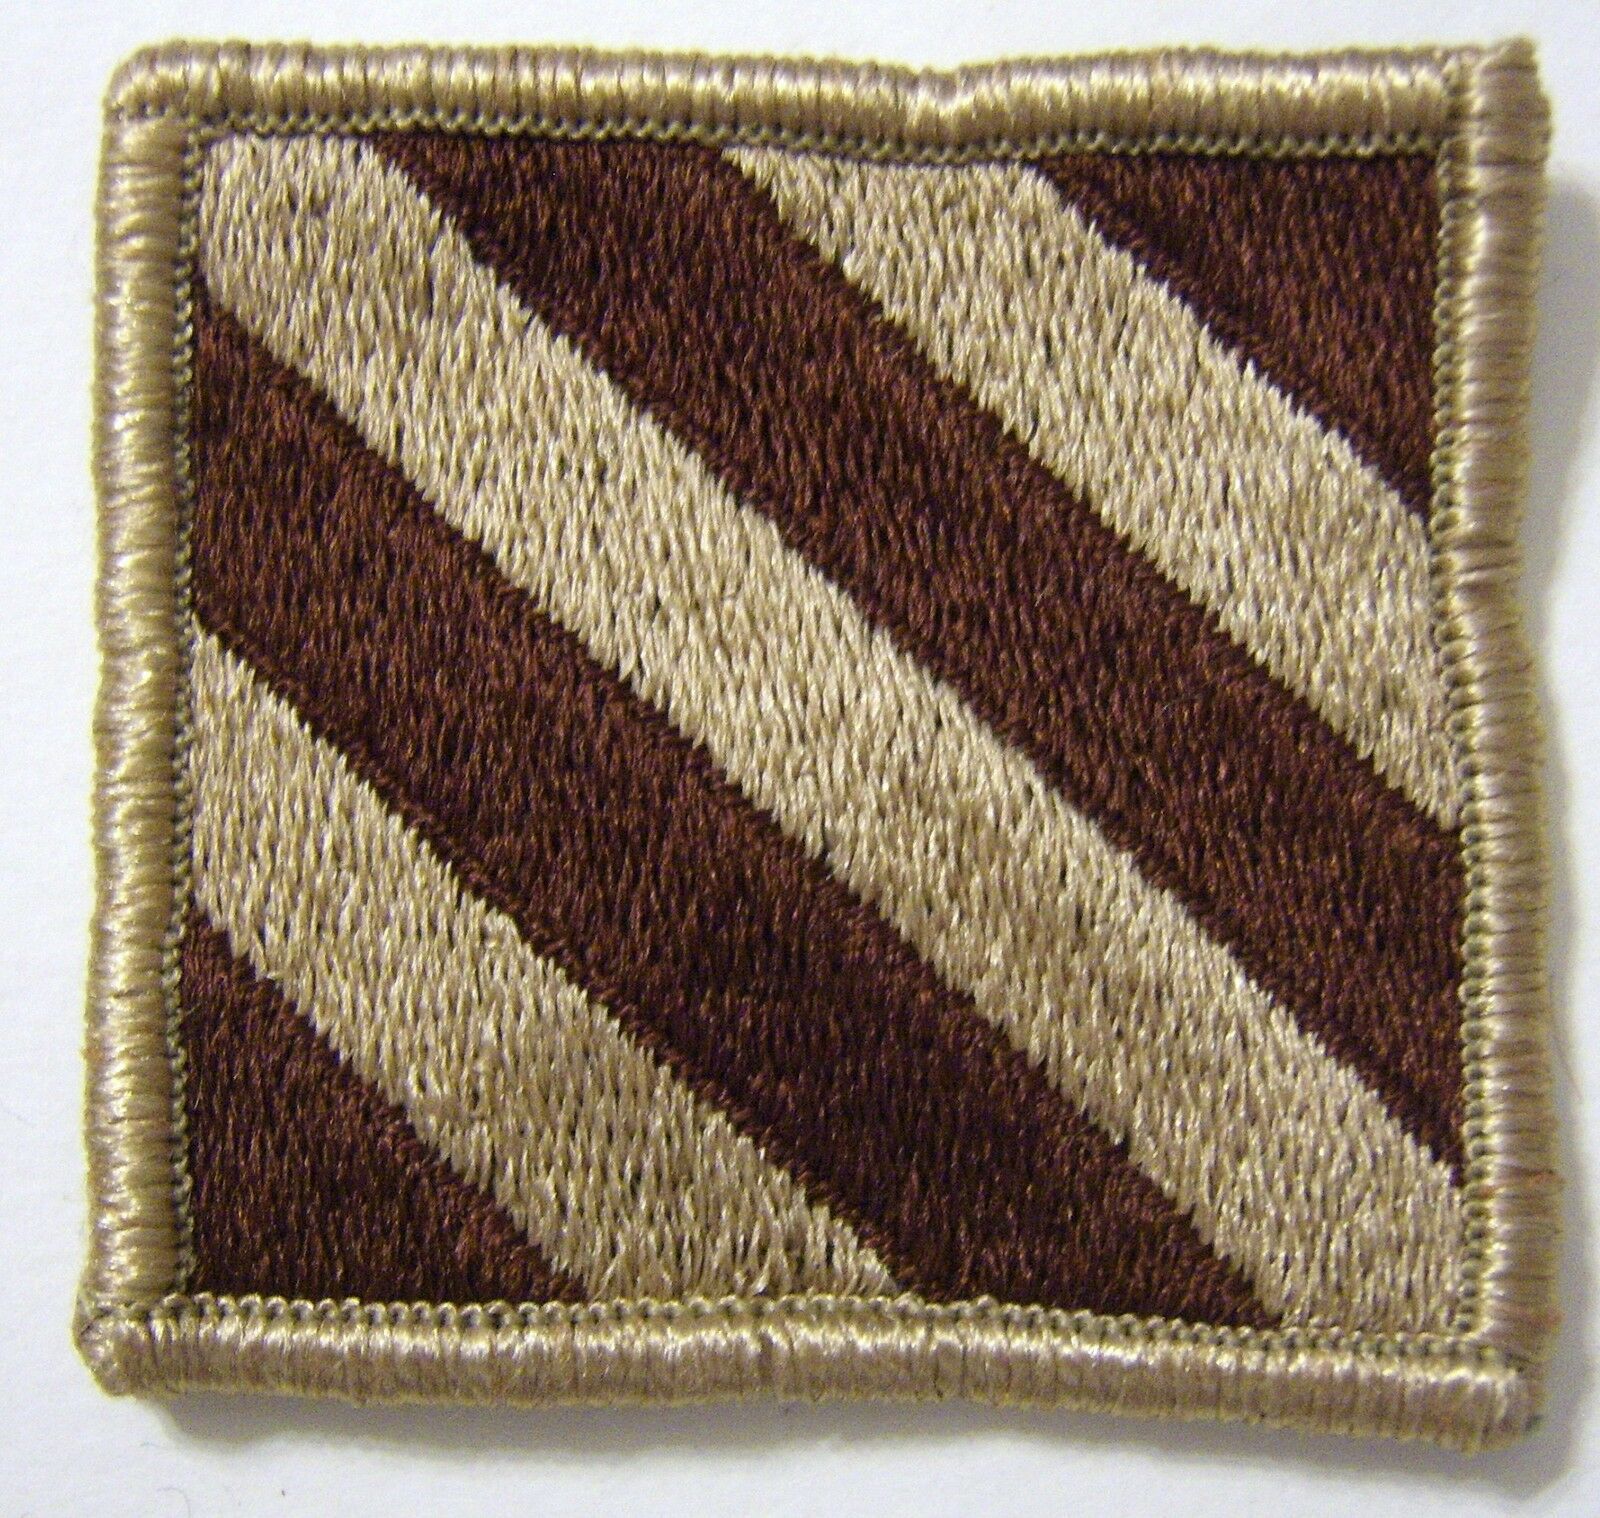 Primary image for 3rd INFANTRY DIVISION PATCH SSI U.S. ARMY - DESERT TAN COLOR :FA12-1